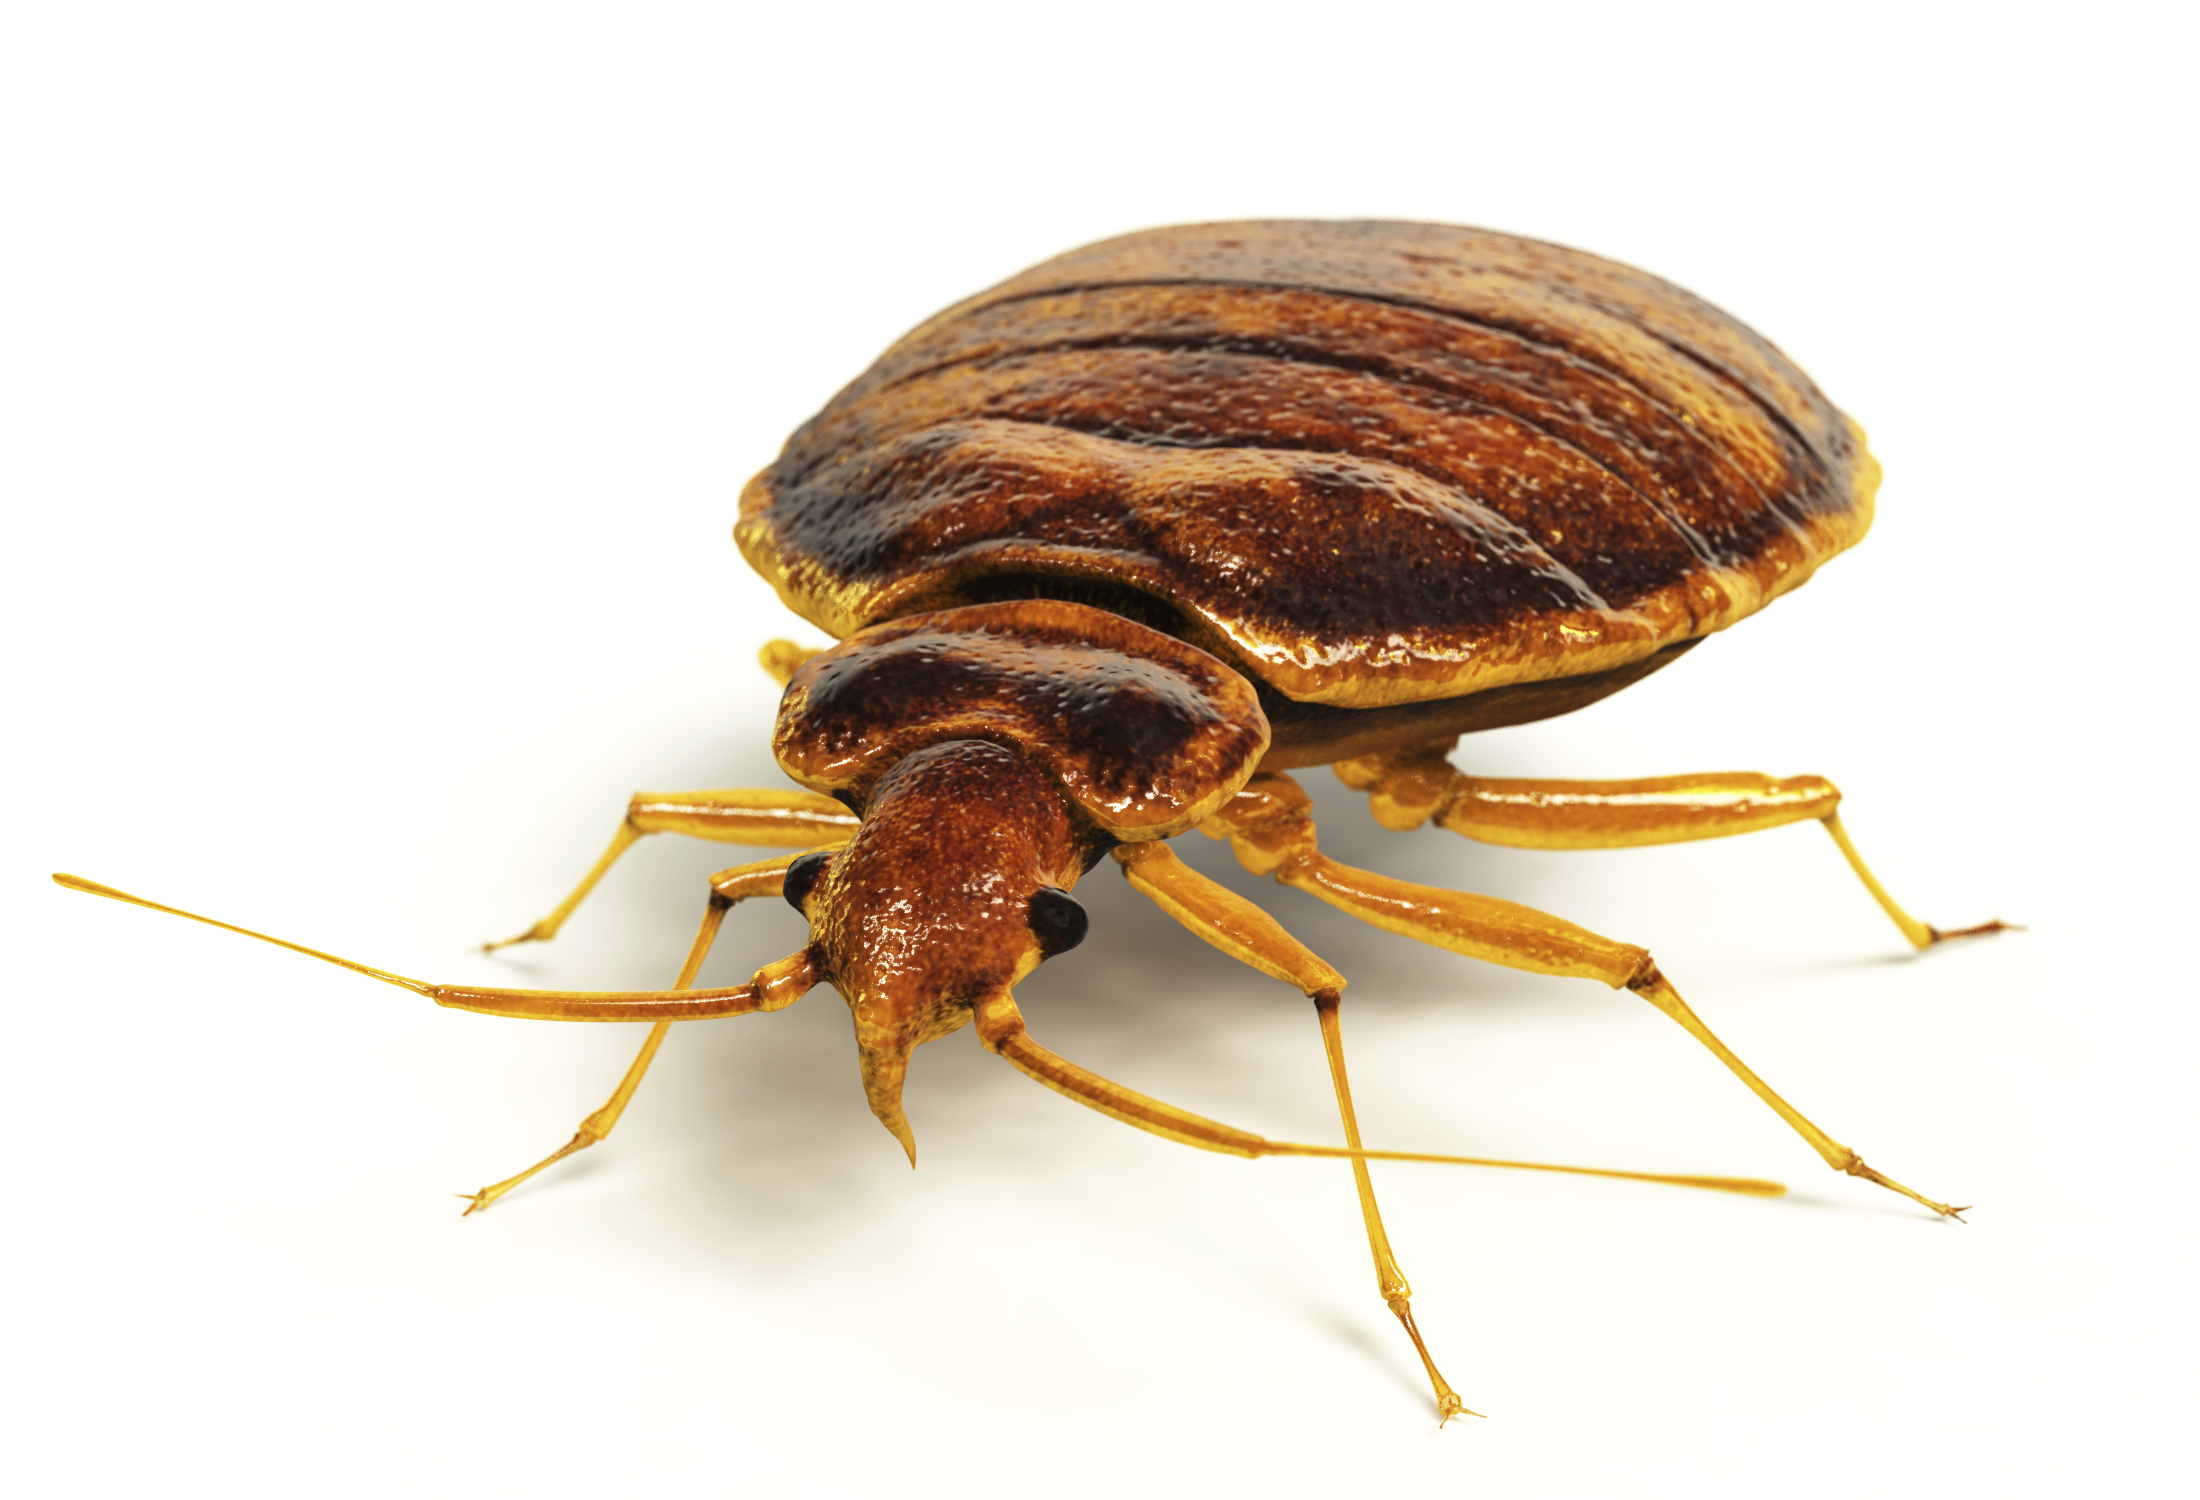 Show me a bed bug